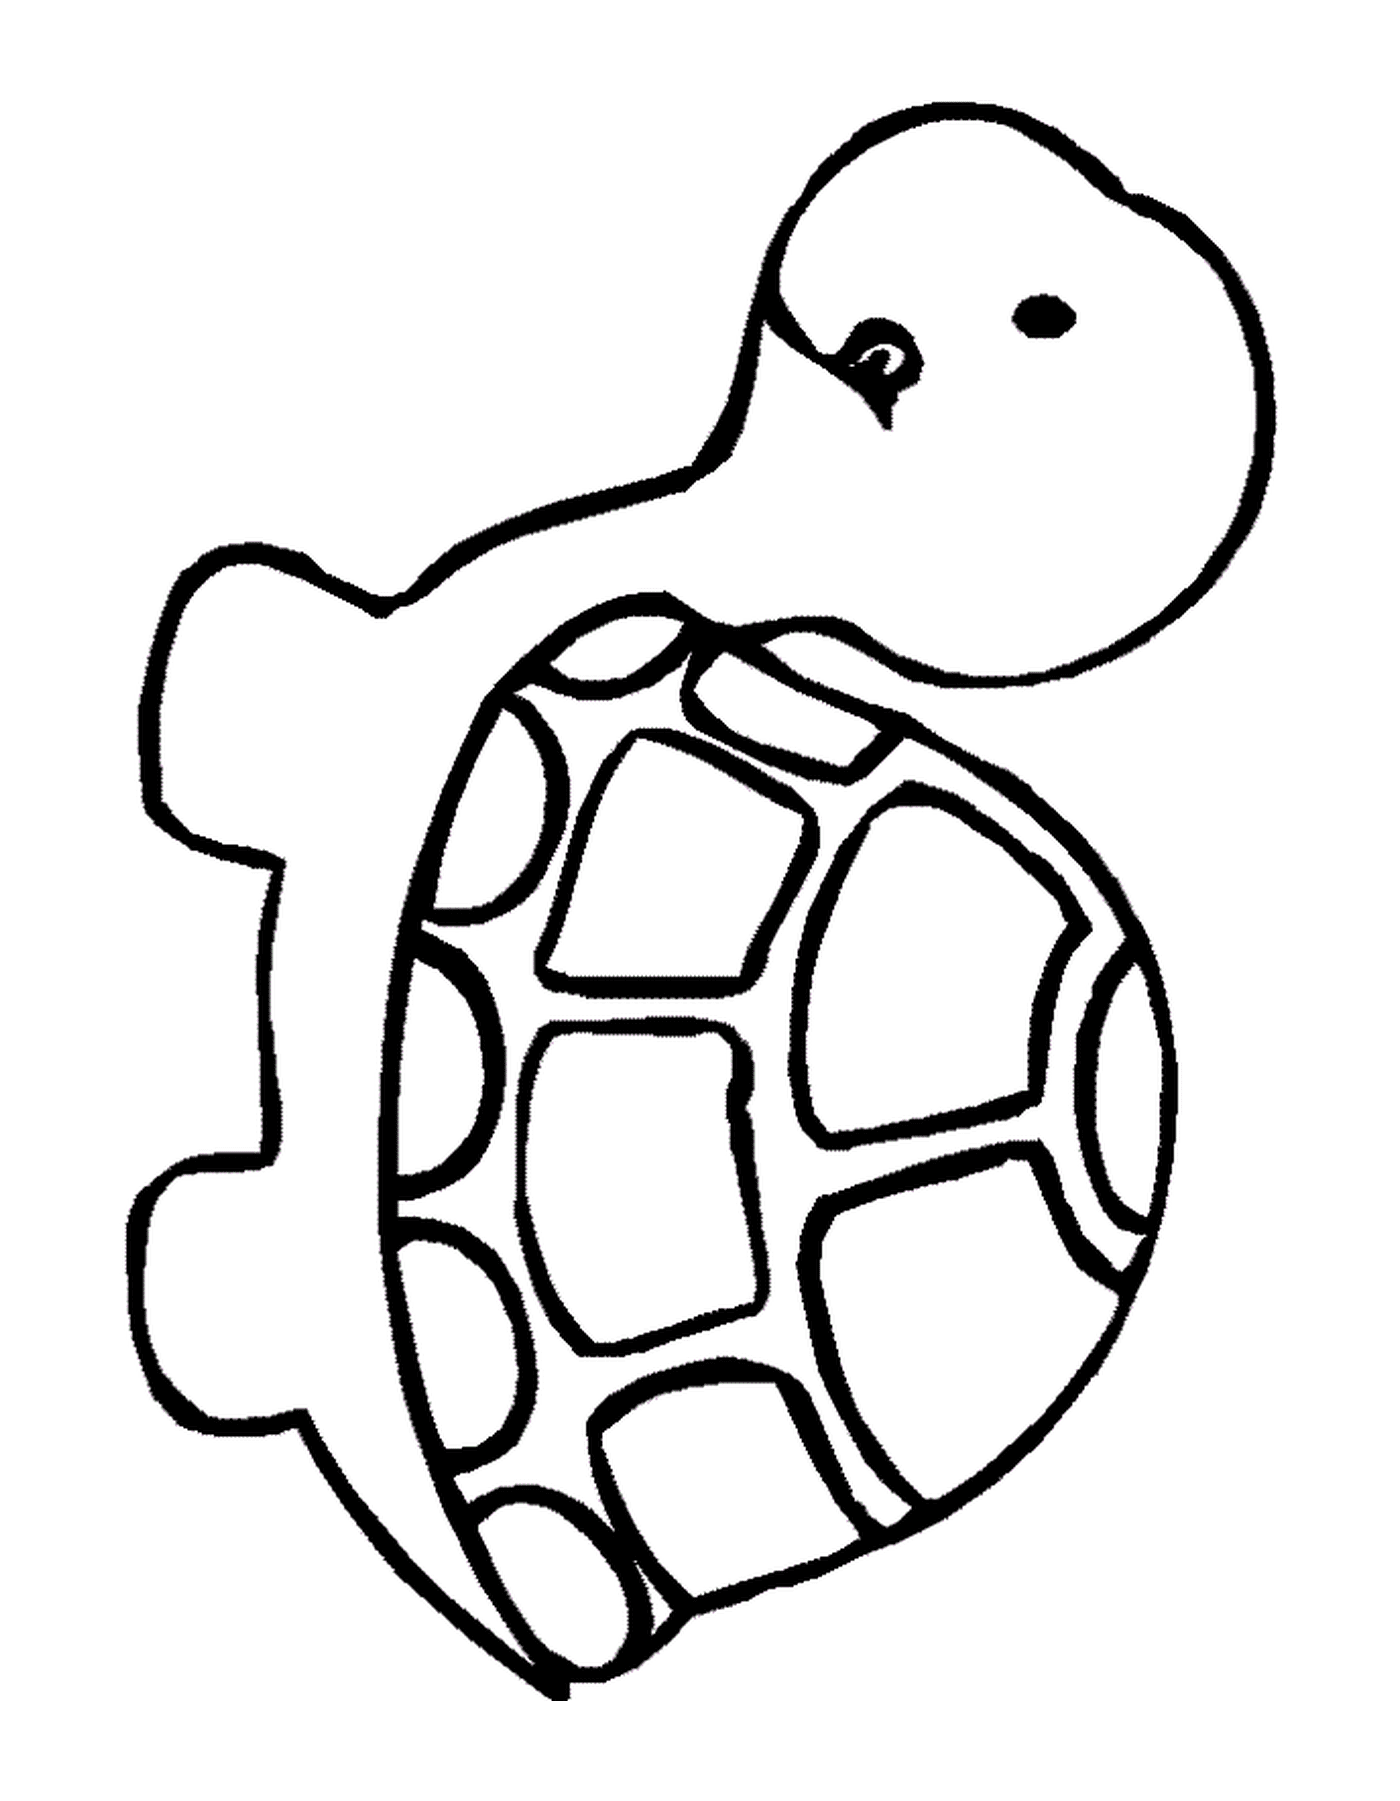  A turtle 